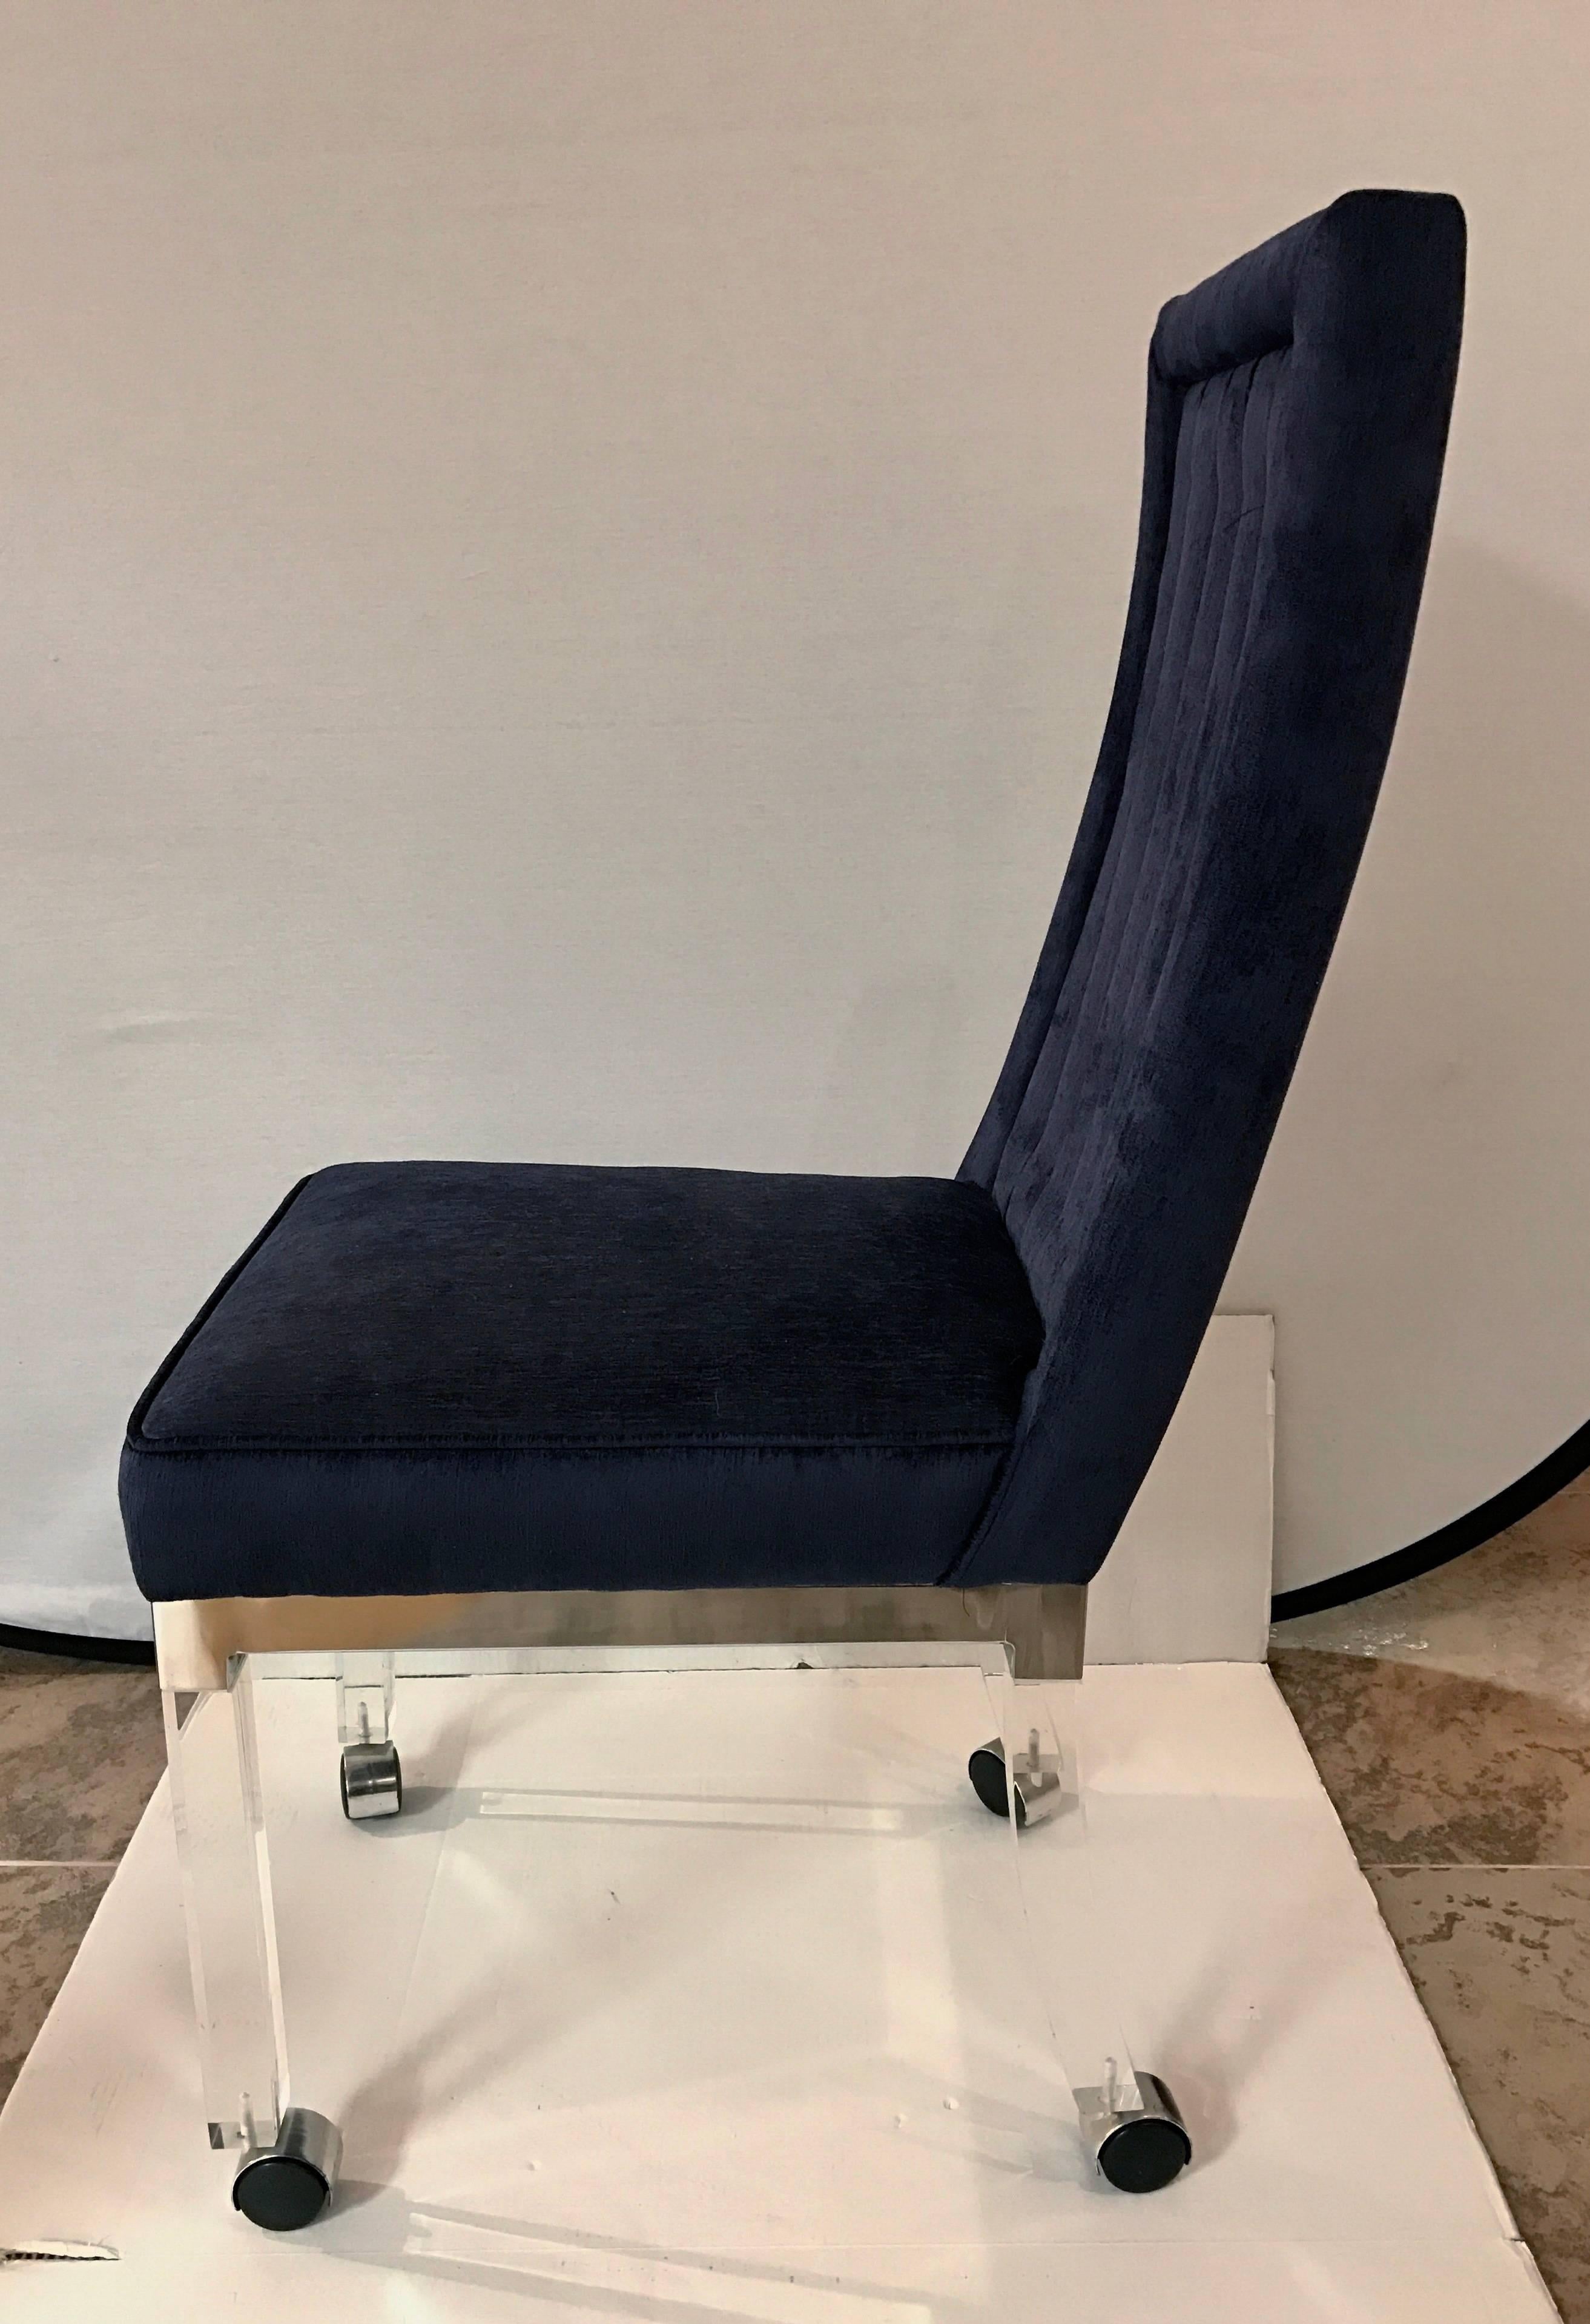 Stunning set of Charles Hollis Jones mid century modern lucite dining chairs on removable castors.  Each features four lucite legs trimmed with chrome, and channel back tufting in a deep royal blue velvet-like fabric.
